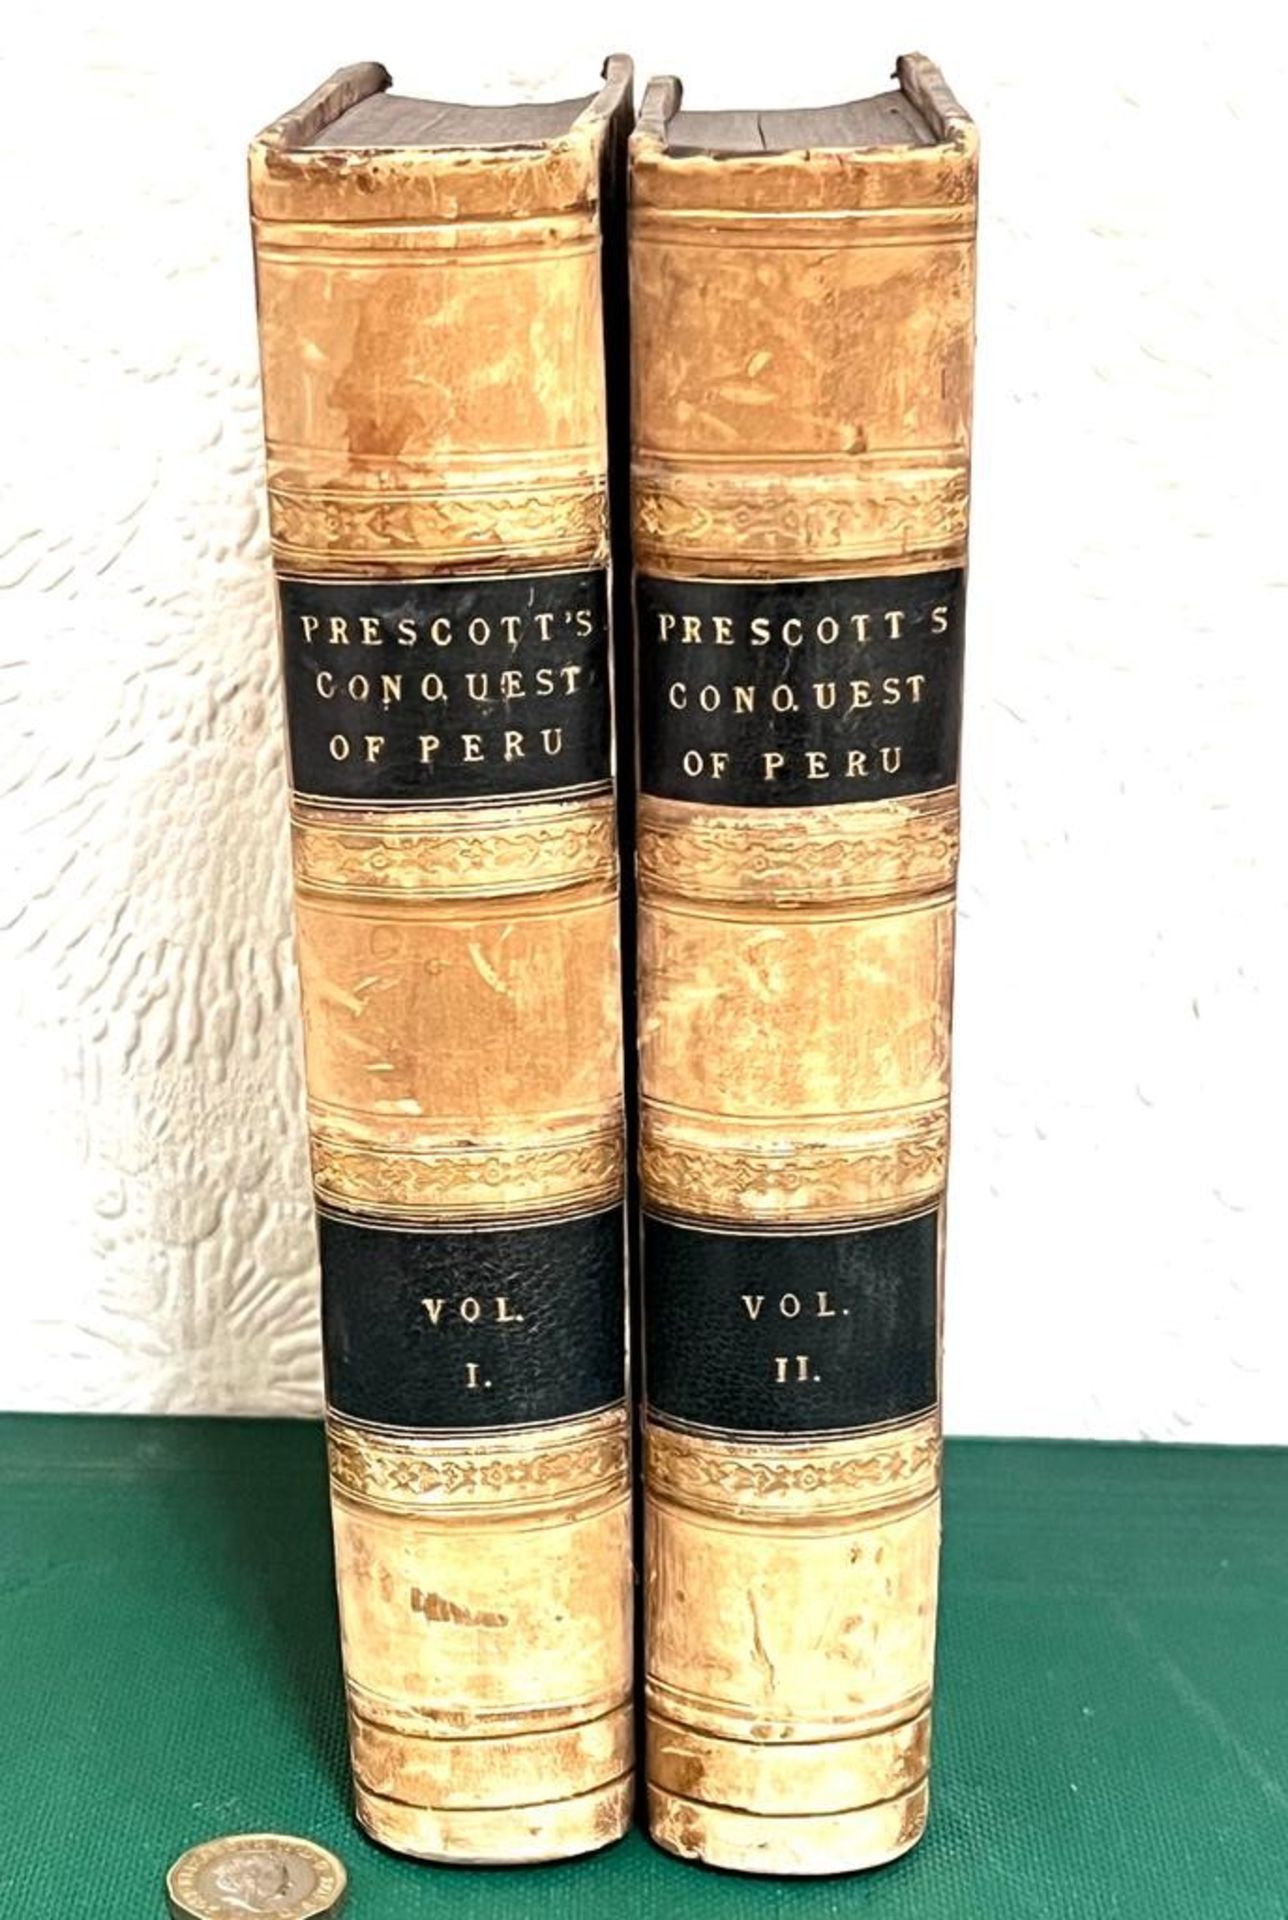 PRESCOTT, WILLIAM, CONQUEST OF PERU, 1847, TWO VOLUMES, QUARTER LEATHER AND MARBLED BOARDS